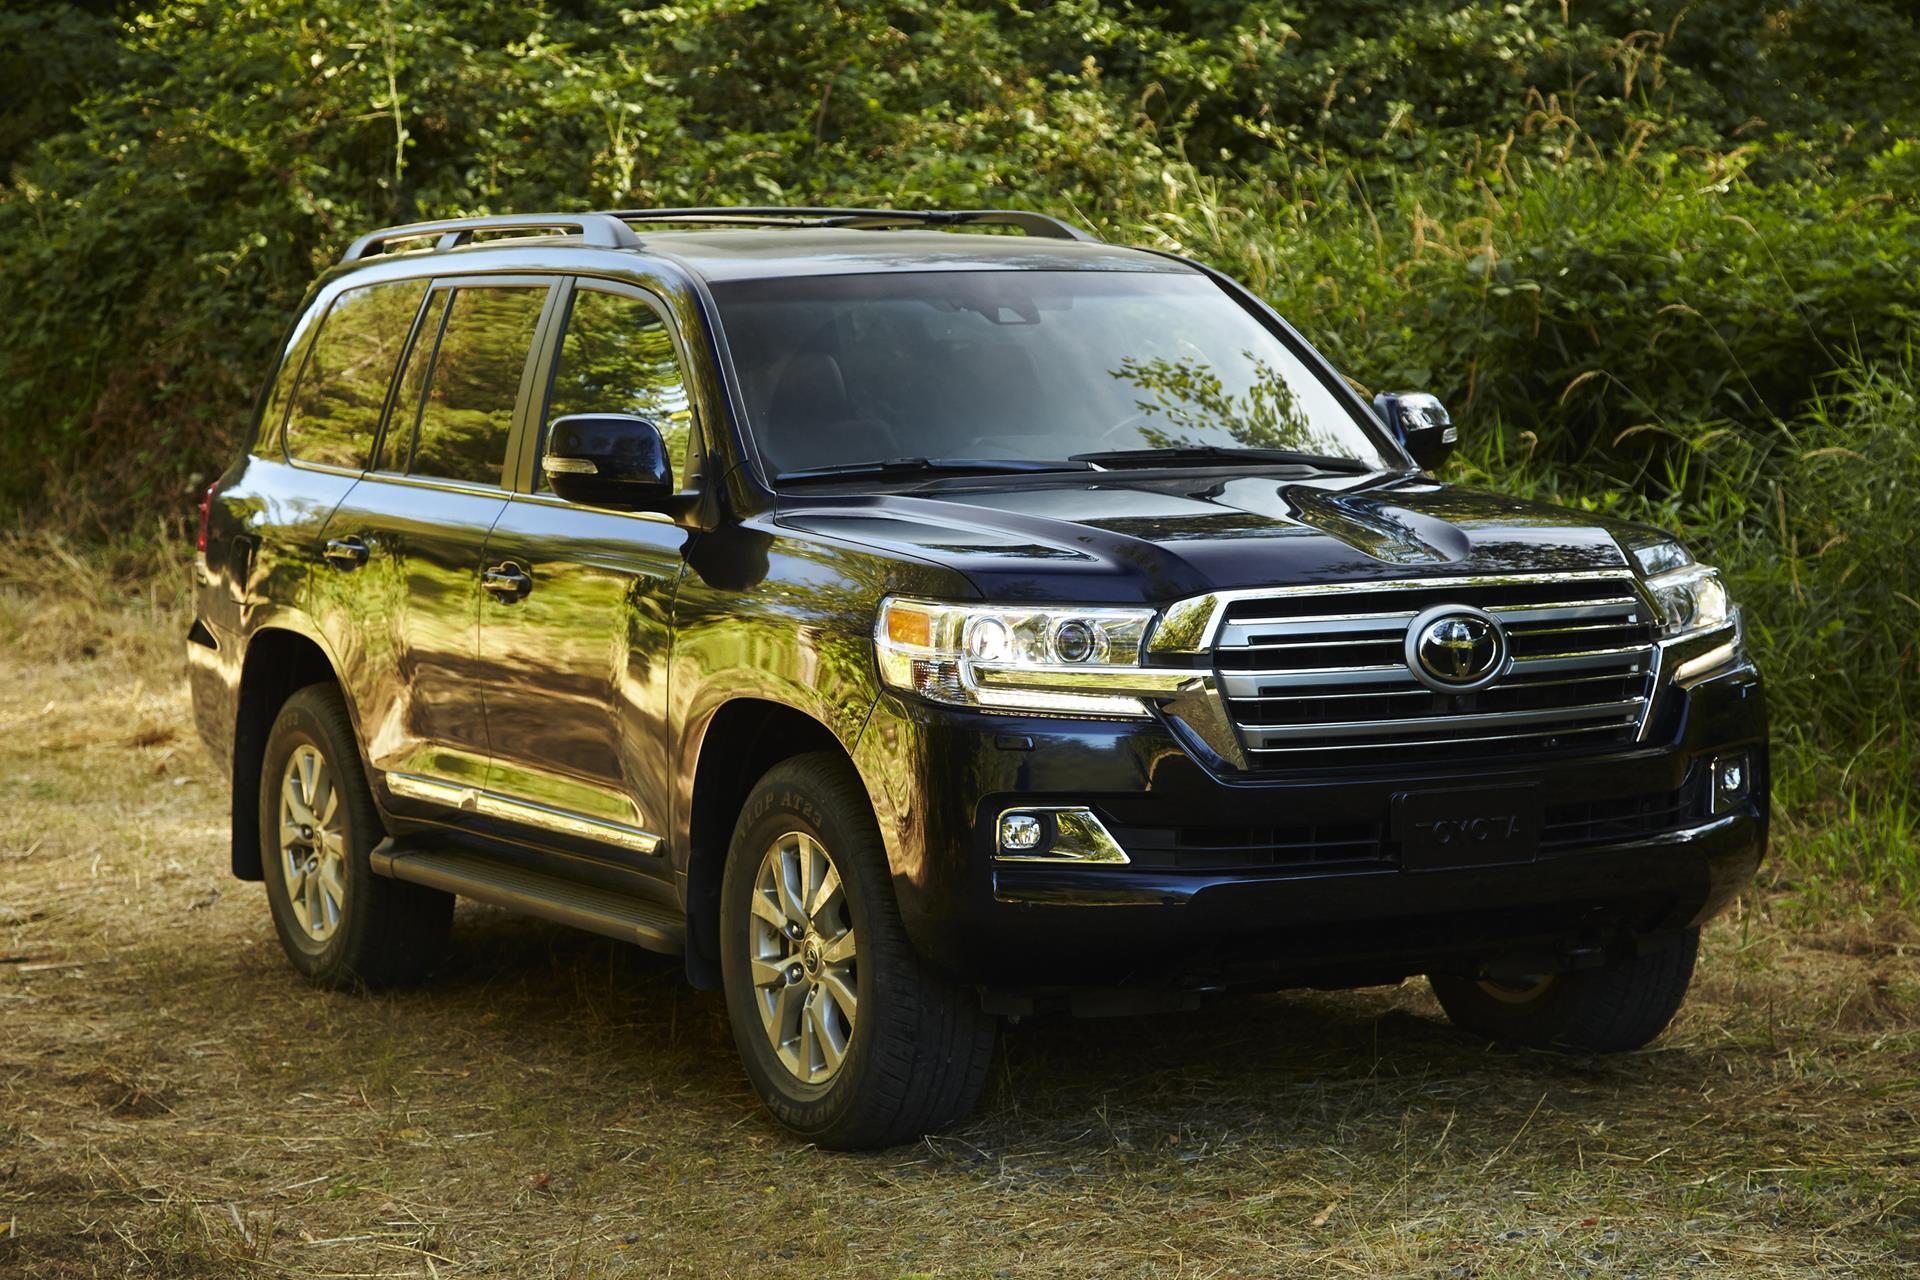 2017 Toyota Land Cruiser technical and mechanical specifications